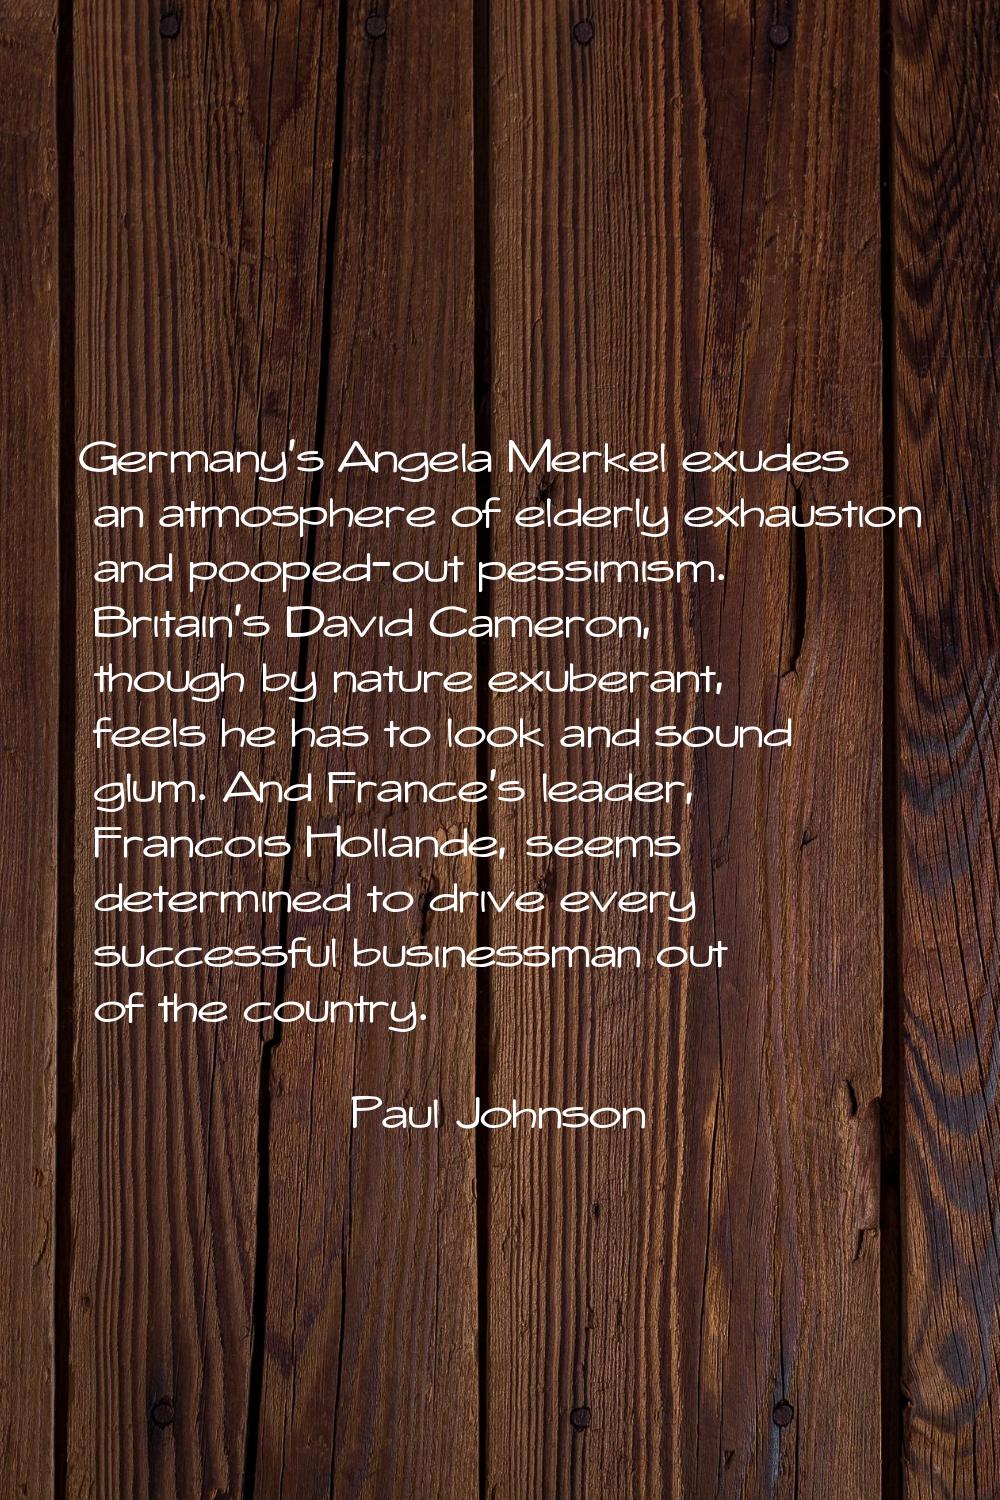 Germany's Angela Merkel exudes an atmosphere of elderly exhaustion and pooped-out pessimism. Britai